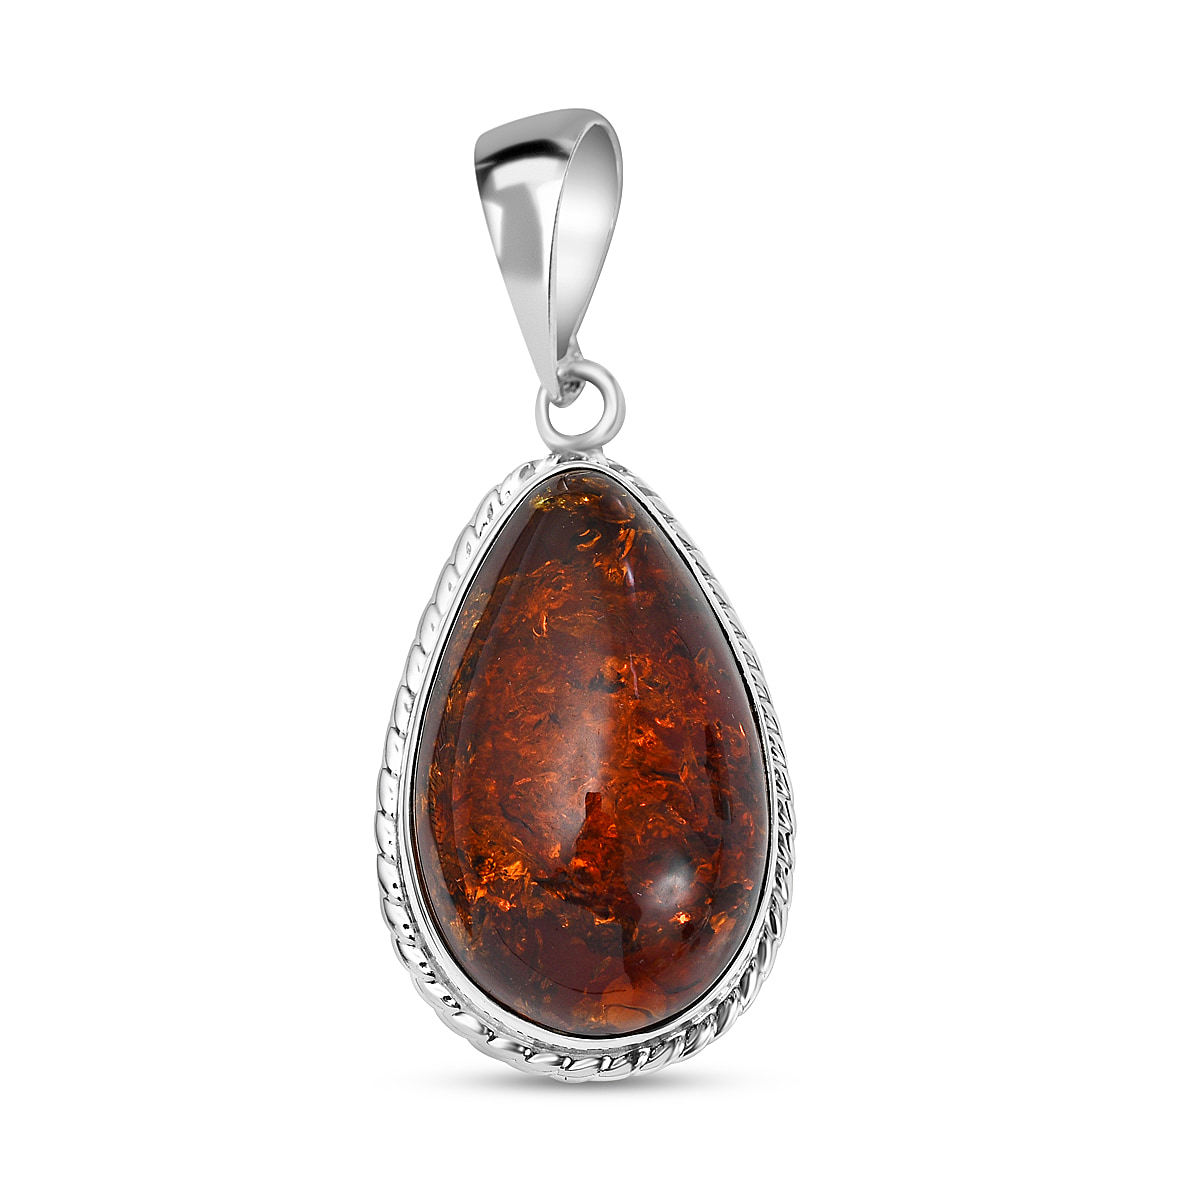 Tucson Special - Baltic Amber Solitaire Pendant in Sterling Silver, Silver Wt. 10.82 Gms